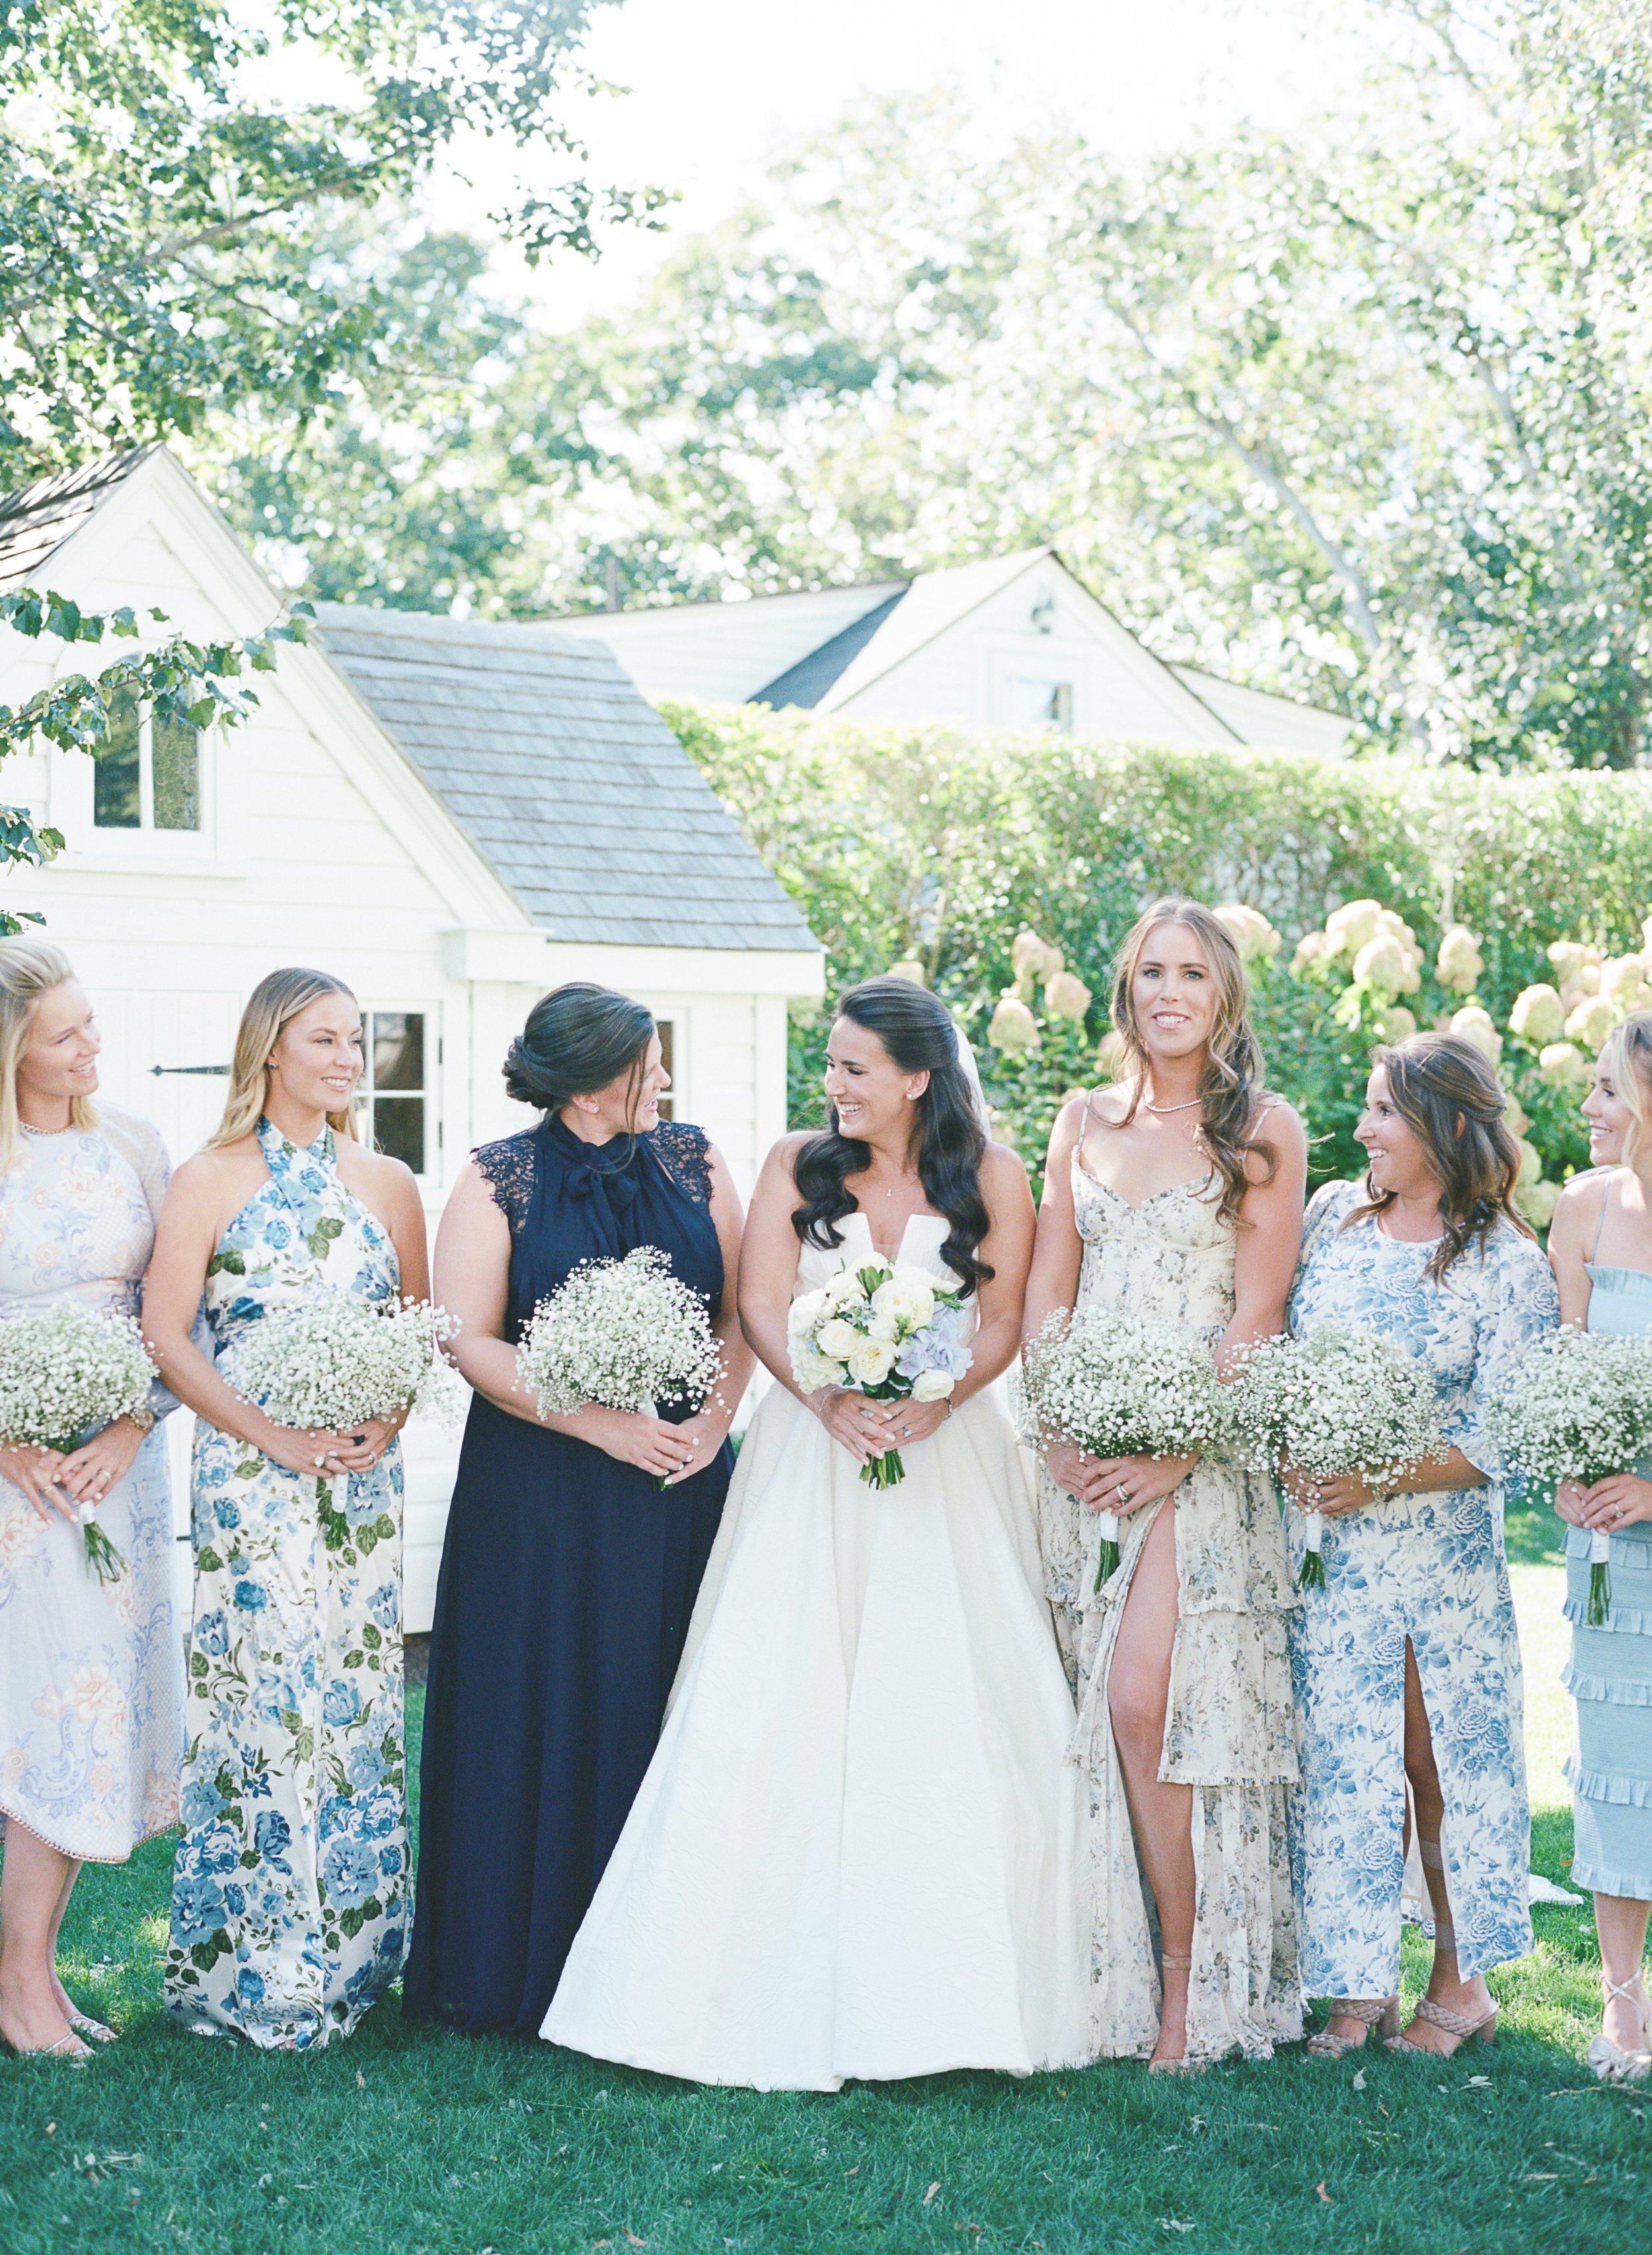 Blue and White Bridal Party Dress in Martha's Vineyard